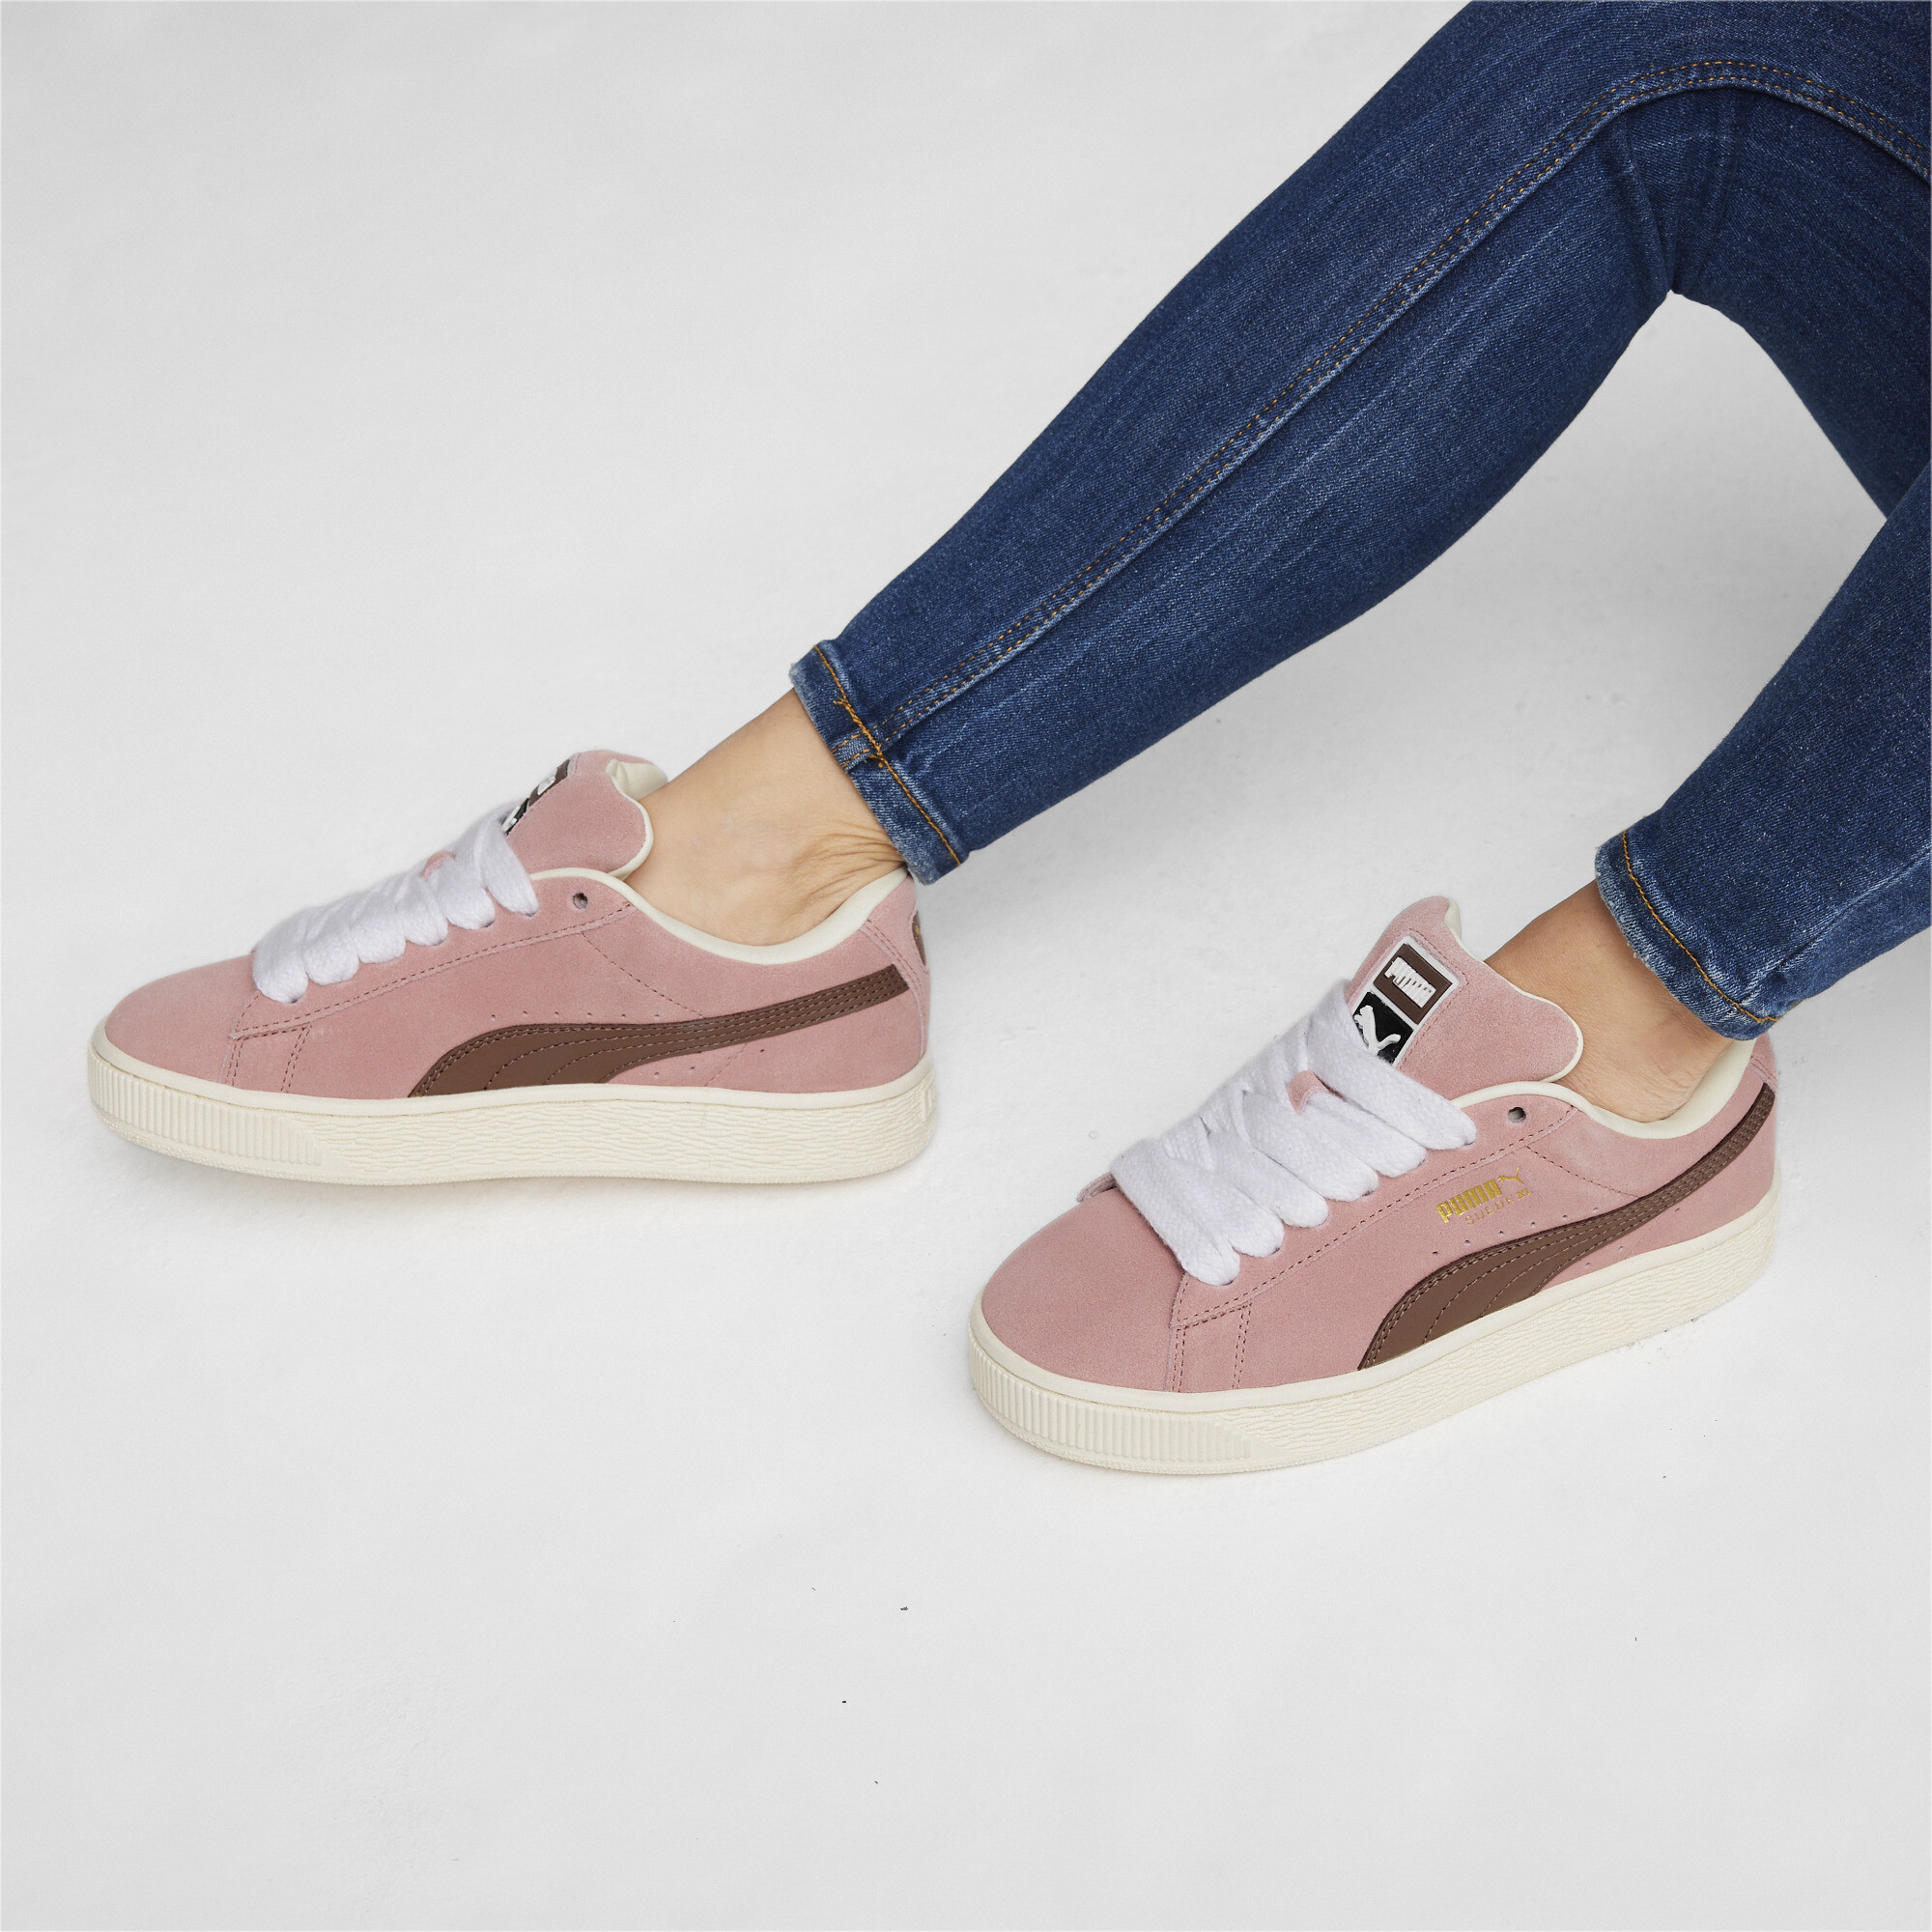 Puma Suede XL Sneakers Unisex, Pink, Size 39, Shoes